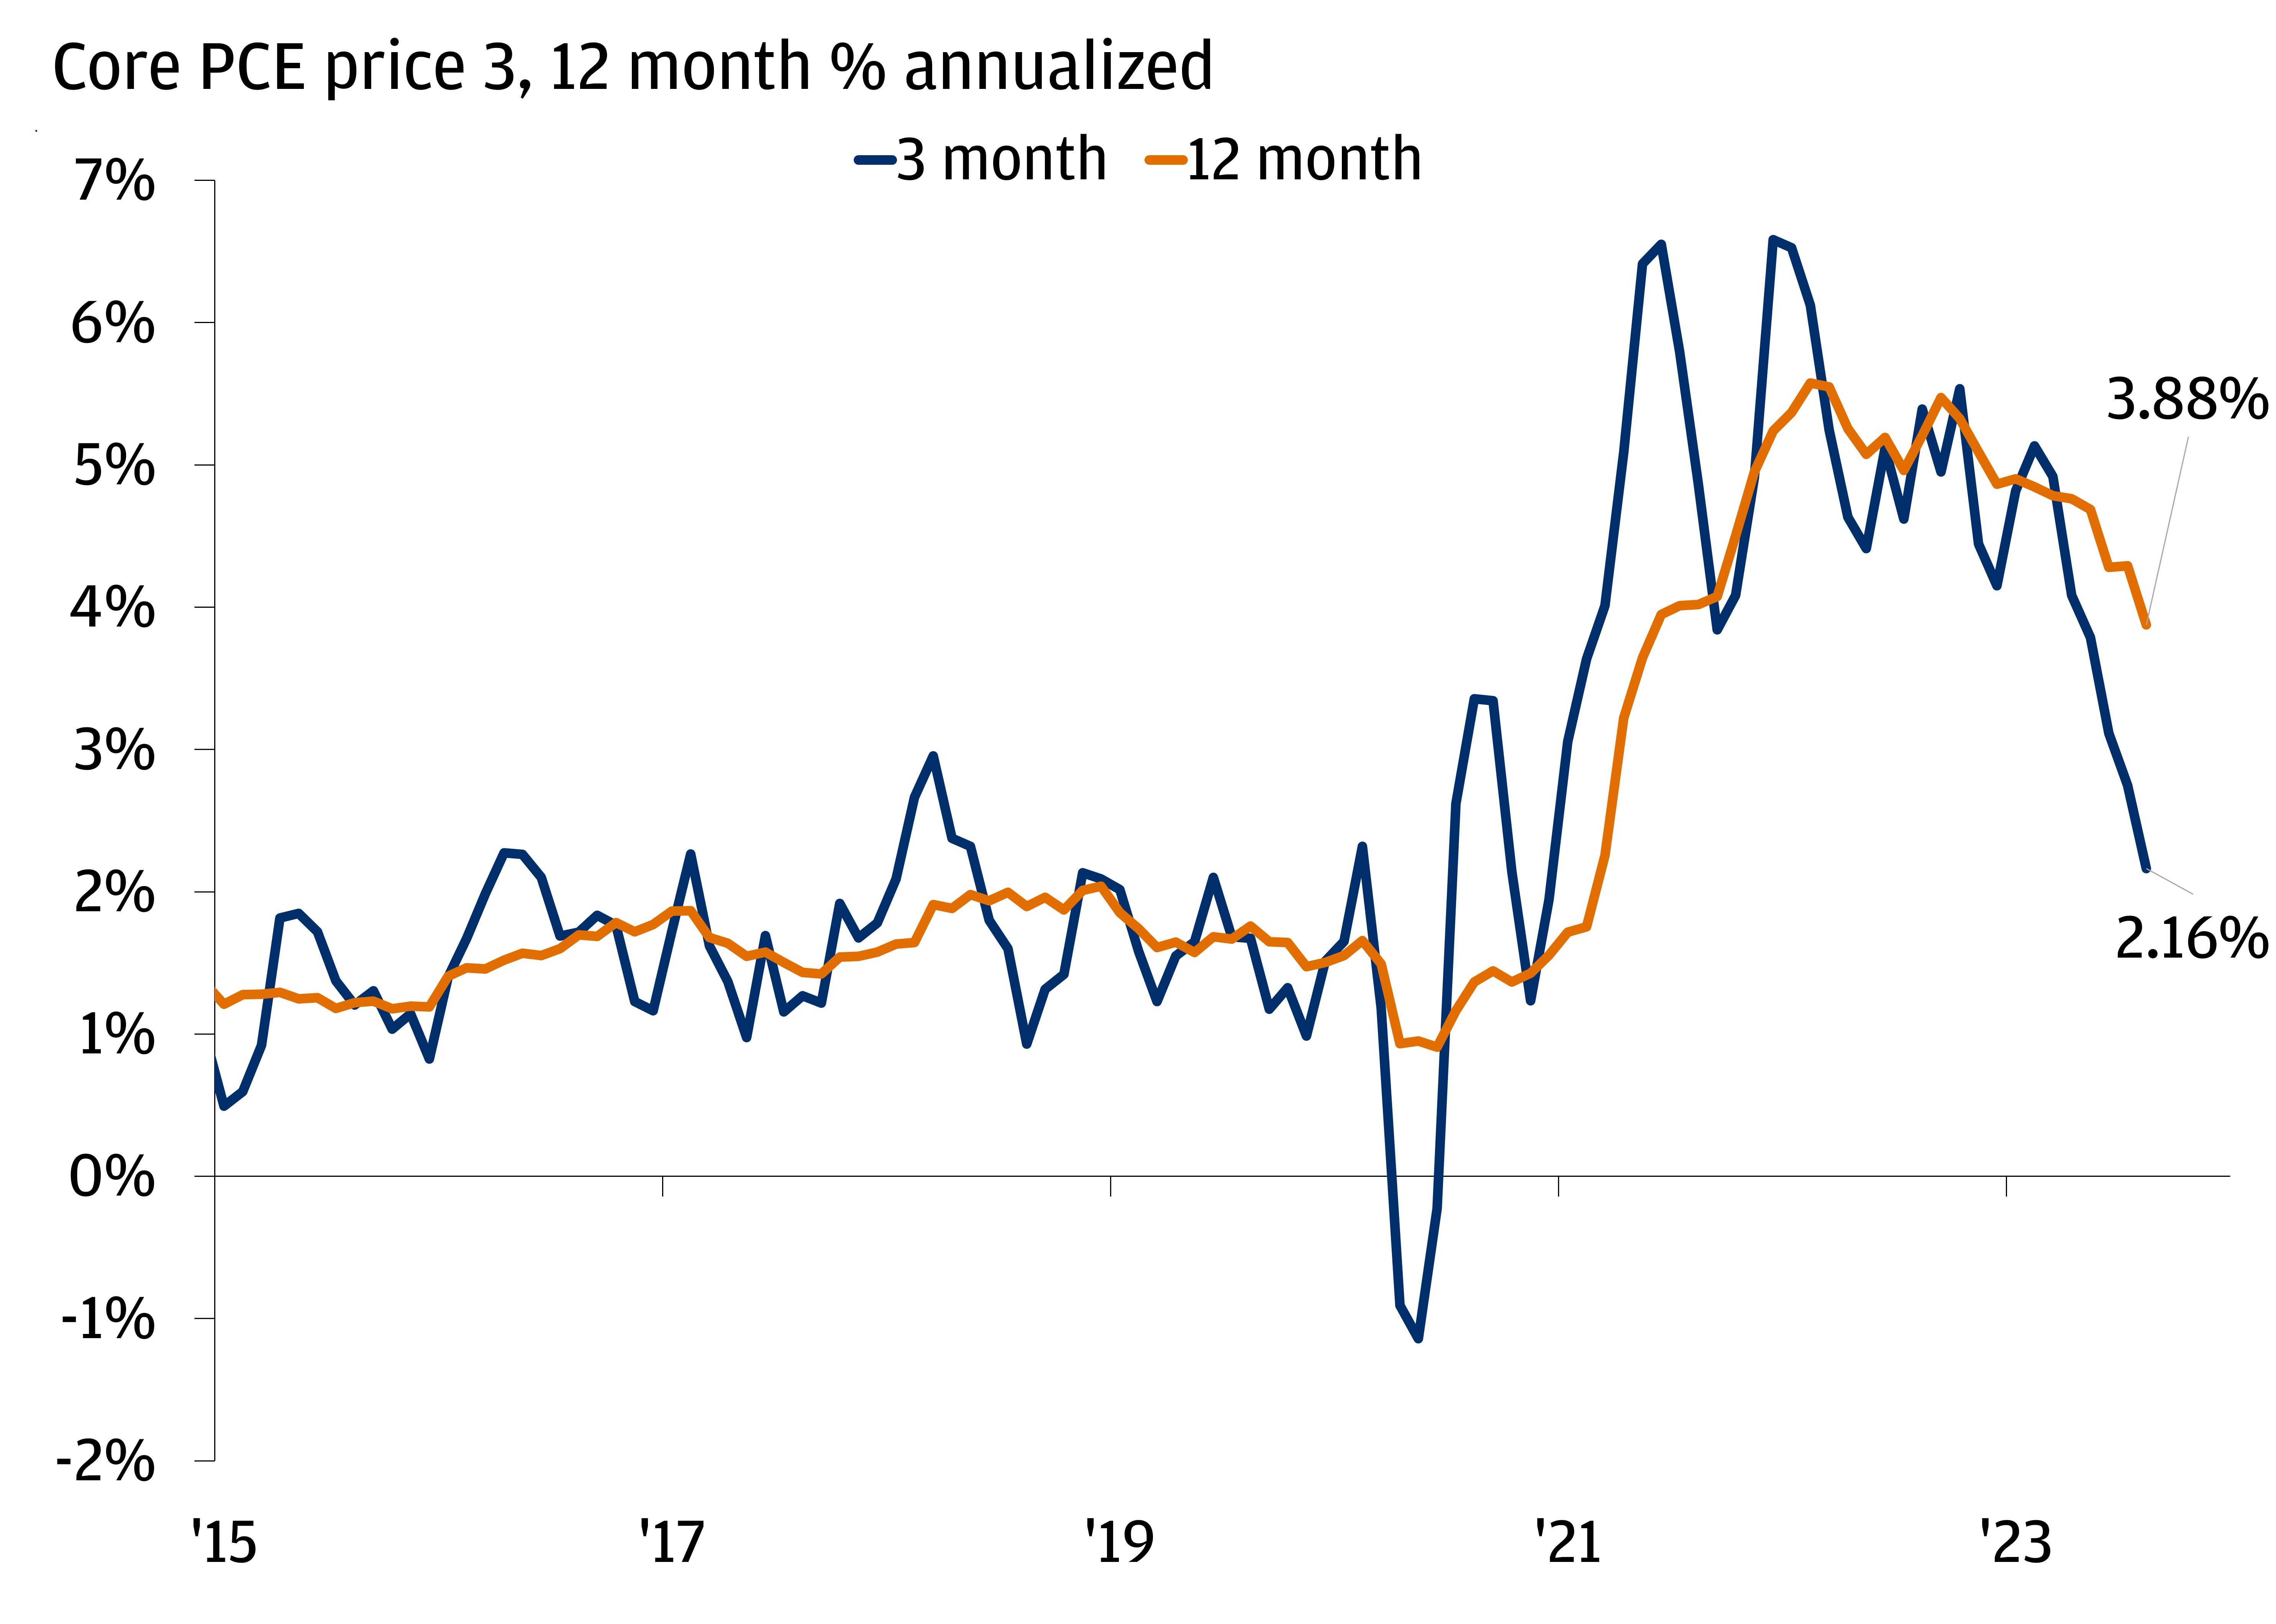 This chart shows the Core PCE Price’s 3- and 12-month annualized change from 2015 to 2023.